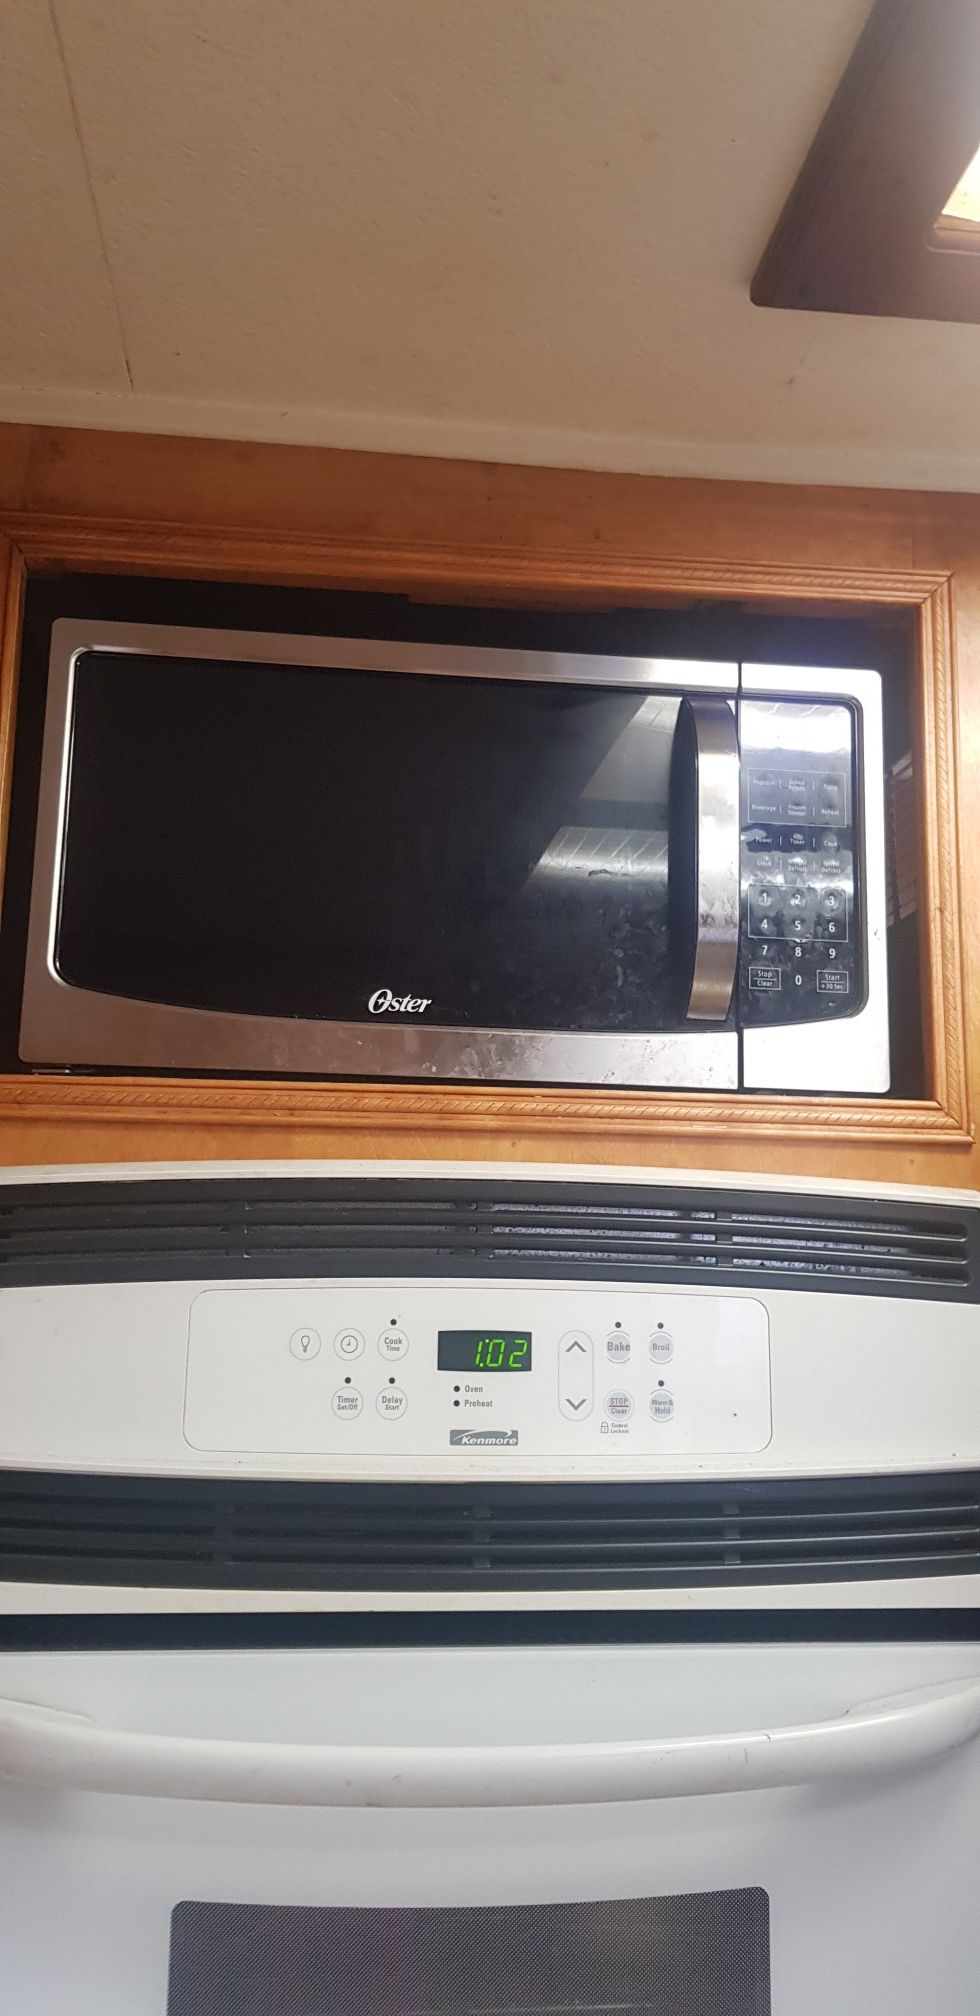 Oster microwave.